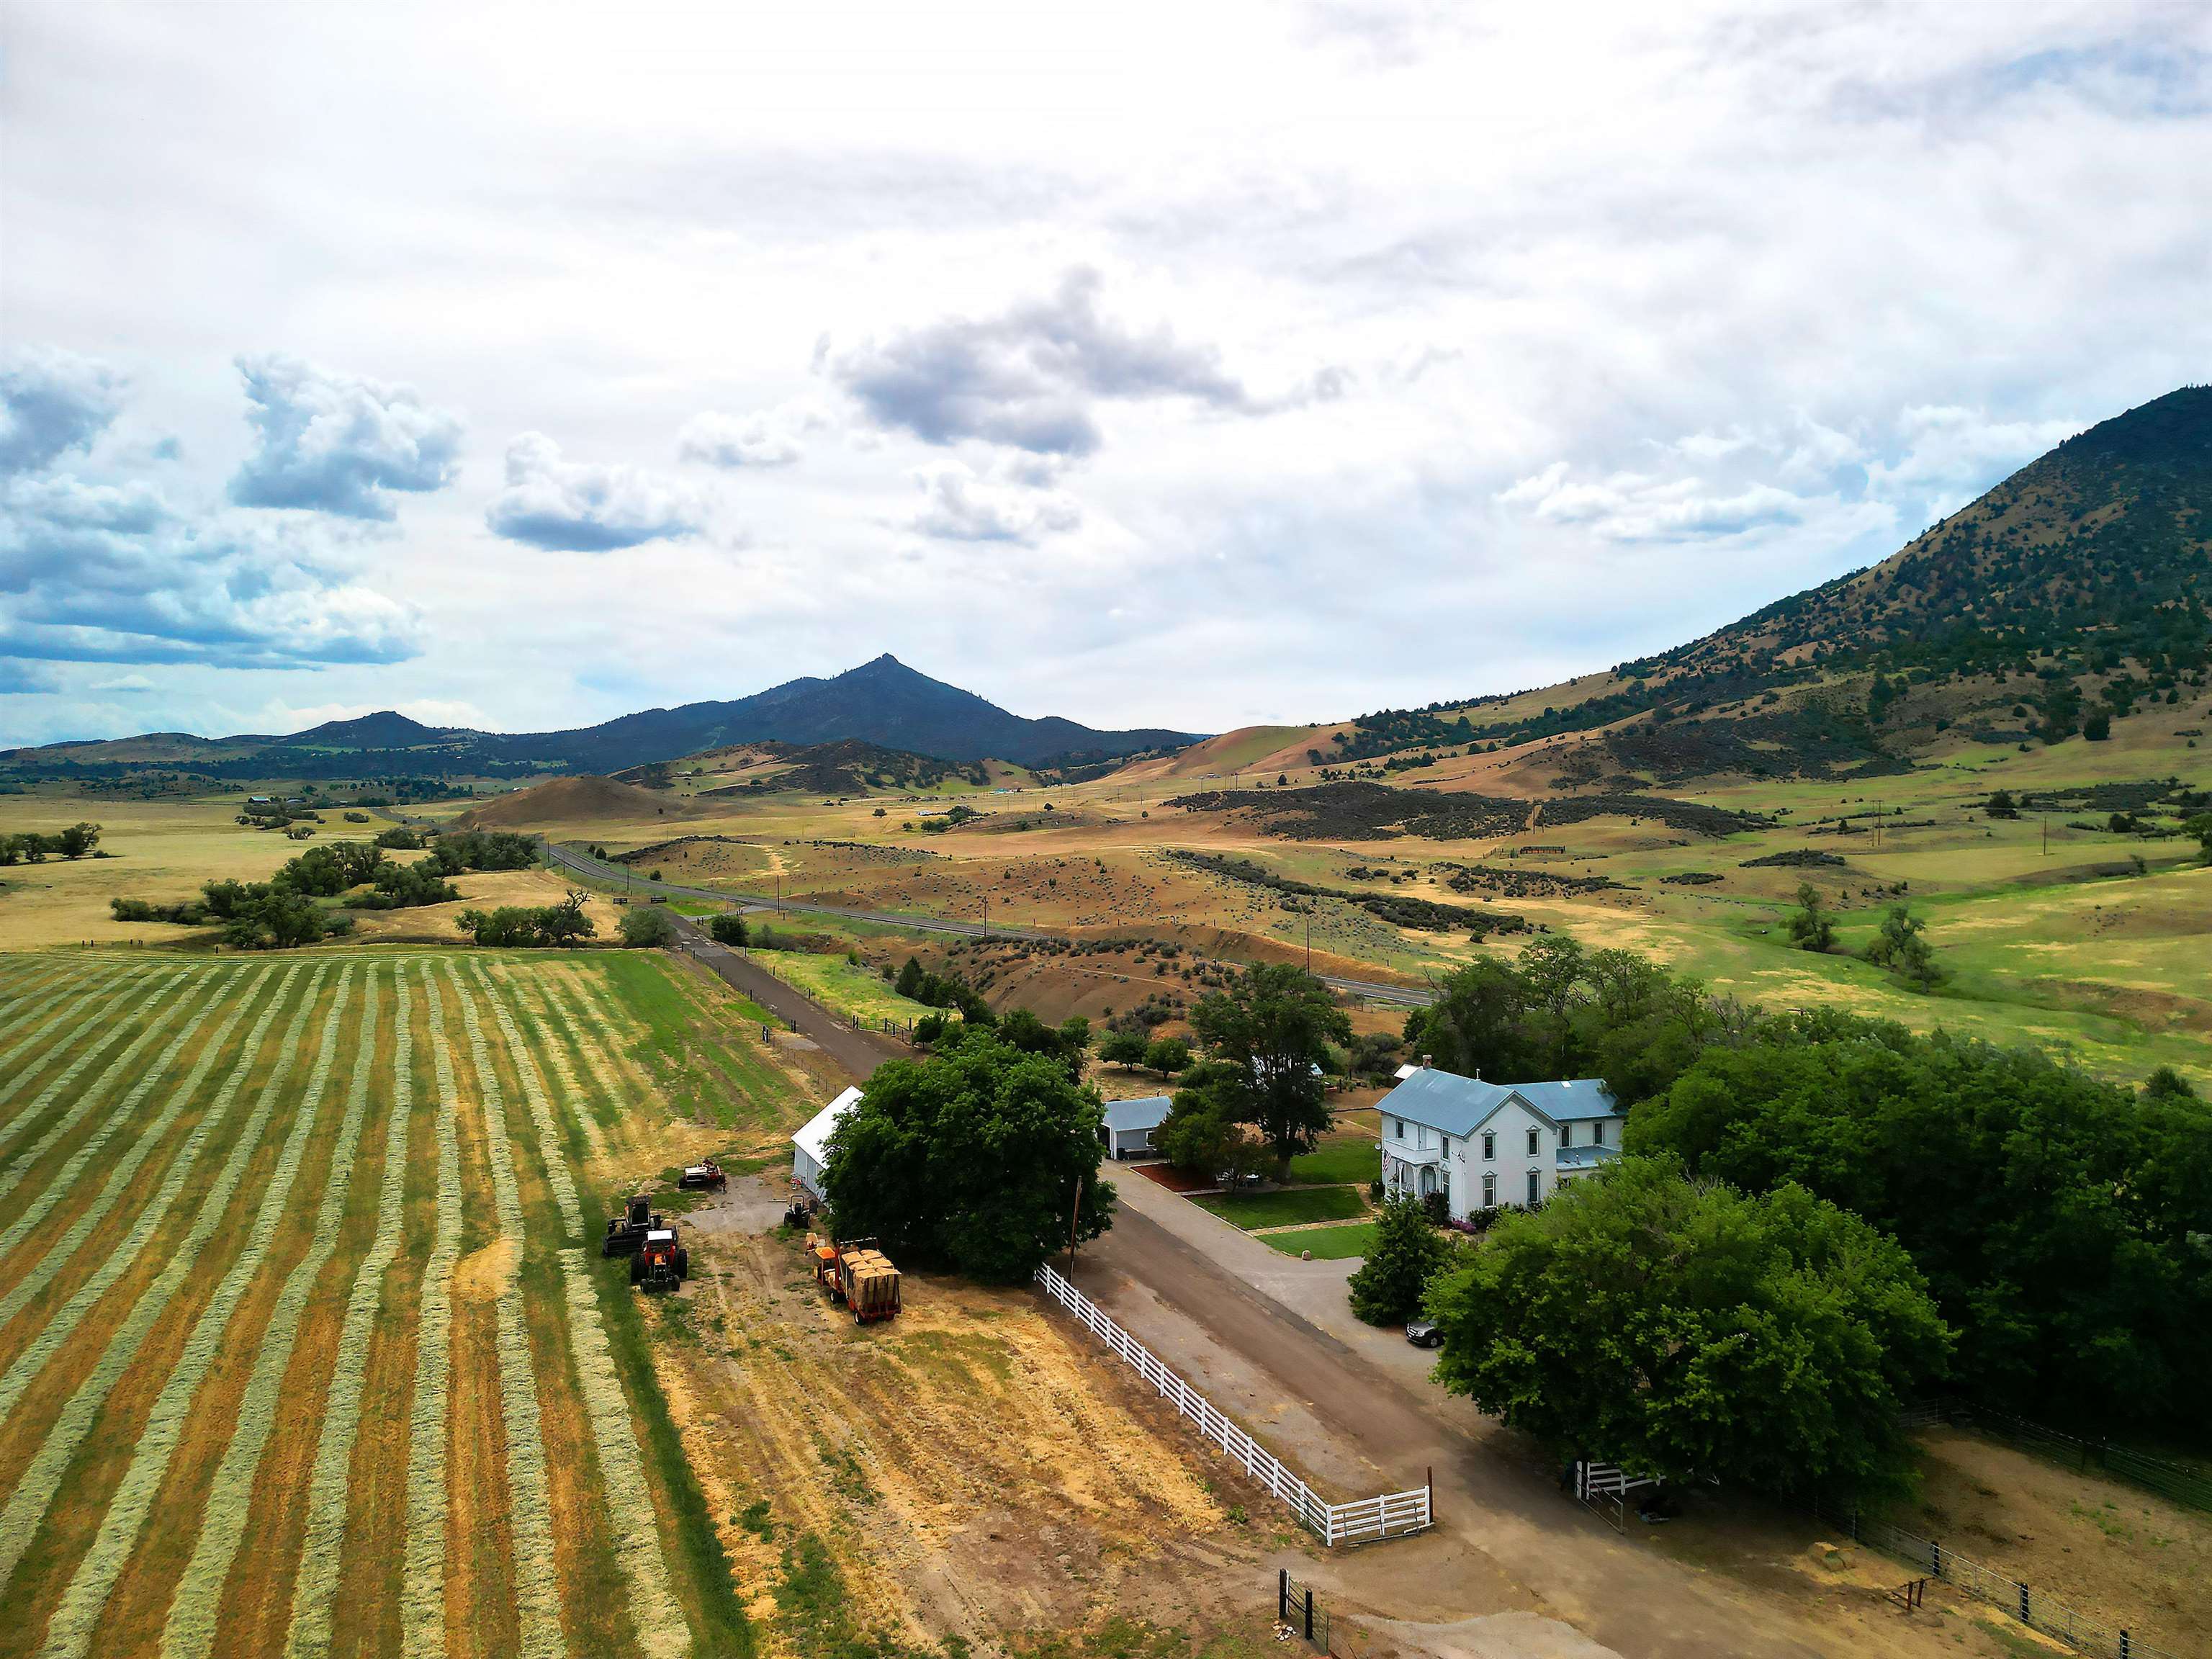 BACK ON MARKET!  Historic Ager Ranch of 166+ acres, open farm ground with hay production, pastures, fenced and cross fenced; 2 barns w/power; 80'x45' pole barn with 20'x80' attached lean-to for hay storage and feeding; 16x20 shop with power and water. Corrals, round pen, chicken house and more. All set off by original 1883 Ranch house restored to incredible charm still keeping its elegant beauty of the past: 10' ceilings, custom vinyl windows; central diesel heat and cooling; beautiful original hardwood floors and nostalgic wainscoting; kitchen, laundry and porch with custom cabinets; large bedrooms, lots of storage; built-in bookcases and crown molding in master; replumbed and rewired in 2002;F/A diesel and AC;  monitor heat as back up; laminate floors in family room, carpet in bedrooms.  Unfinished basement is 459 sq ft and provides great storage.  Just 20 minutes to Yreka and 30 minutes to Ashland, OR.